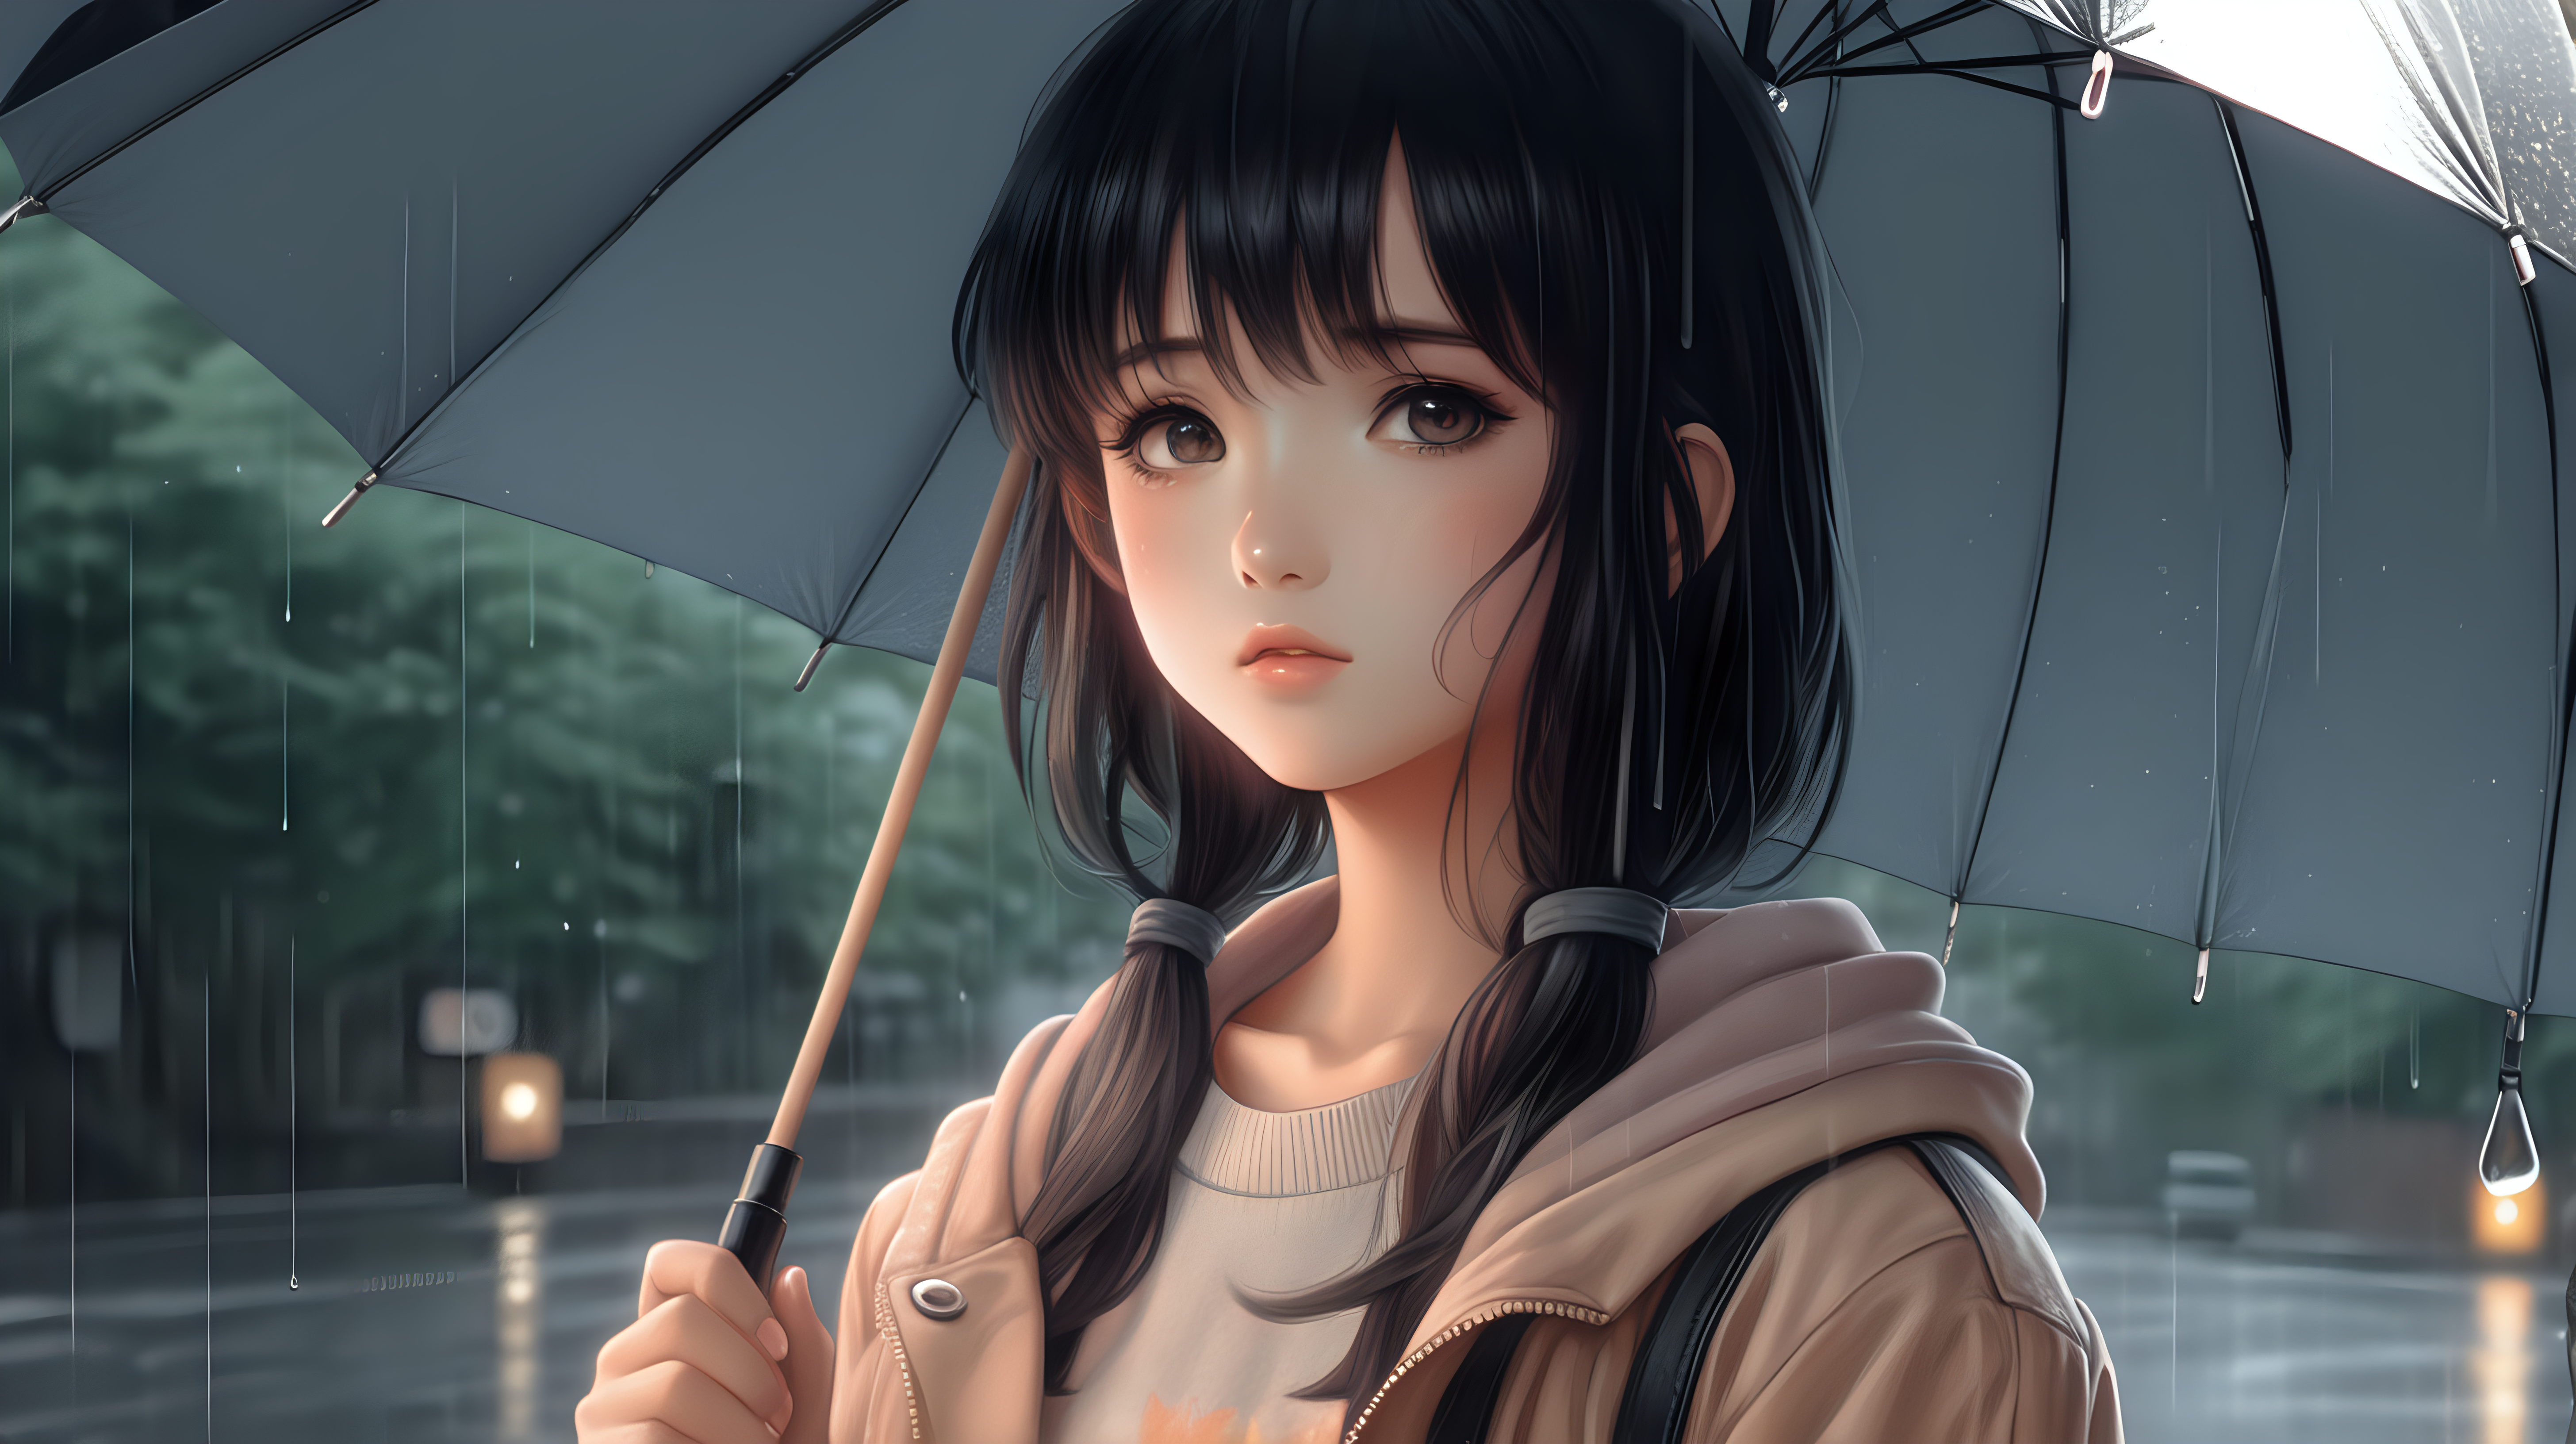 anime girl in the rain muted pastel colors